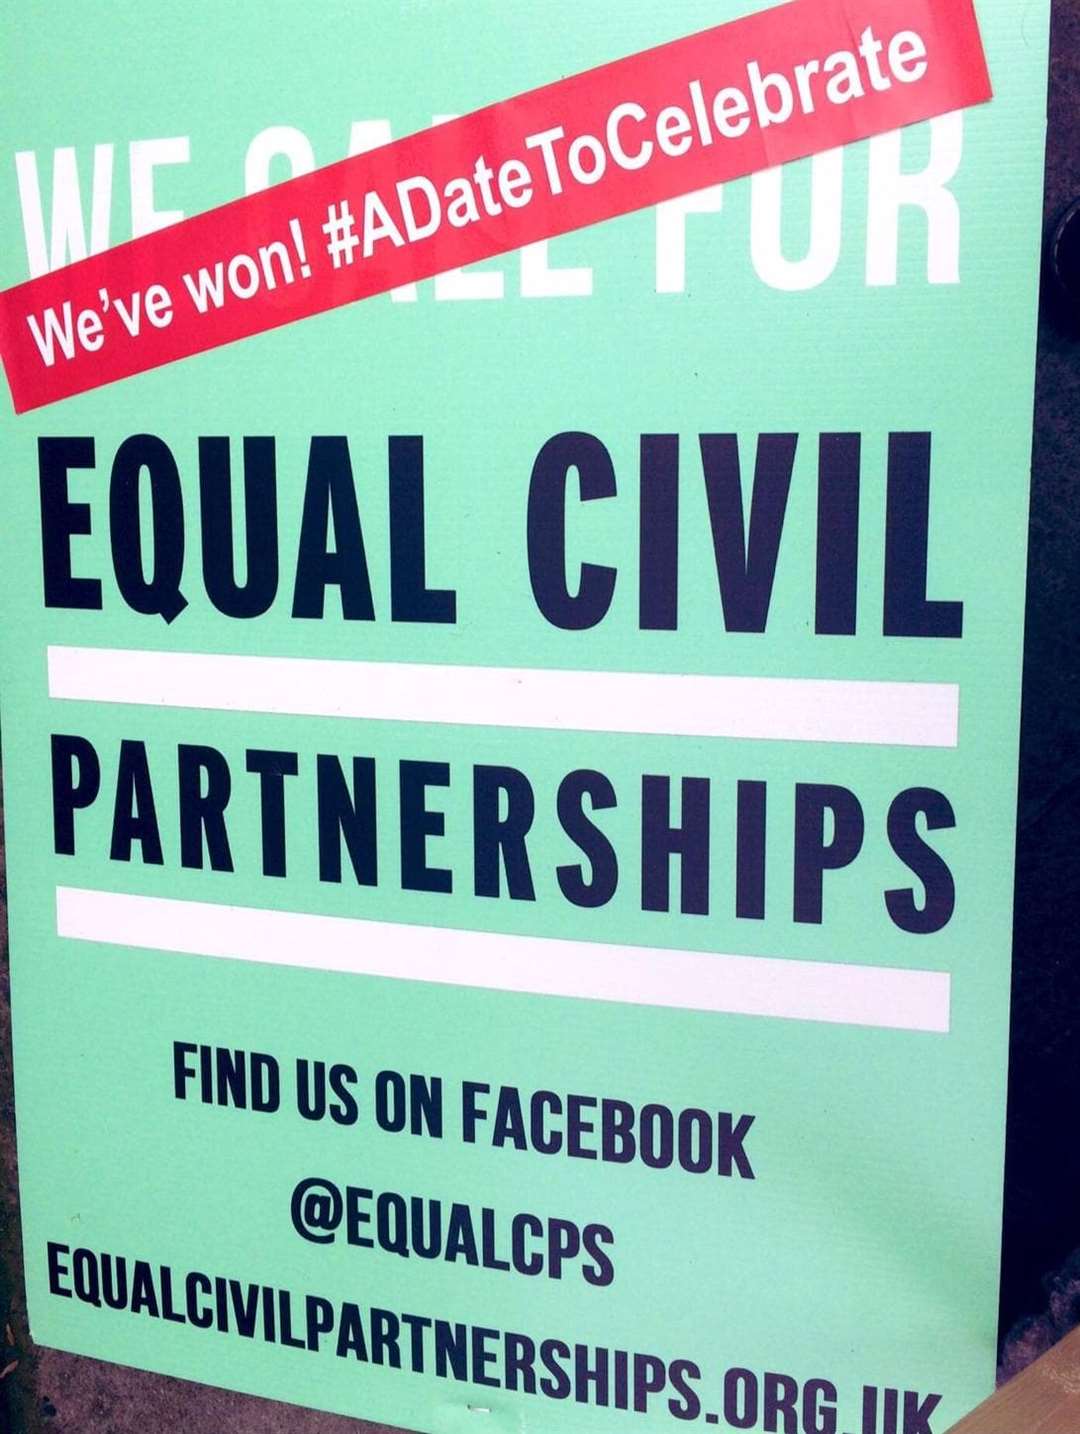 The Equal Civil Partnerships campaign helped get the new law passed